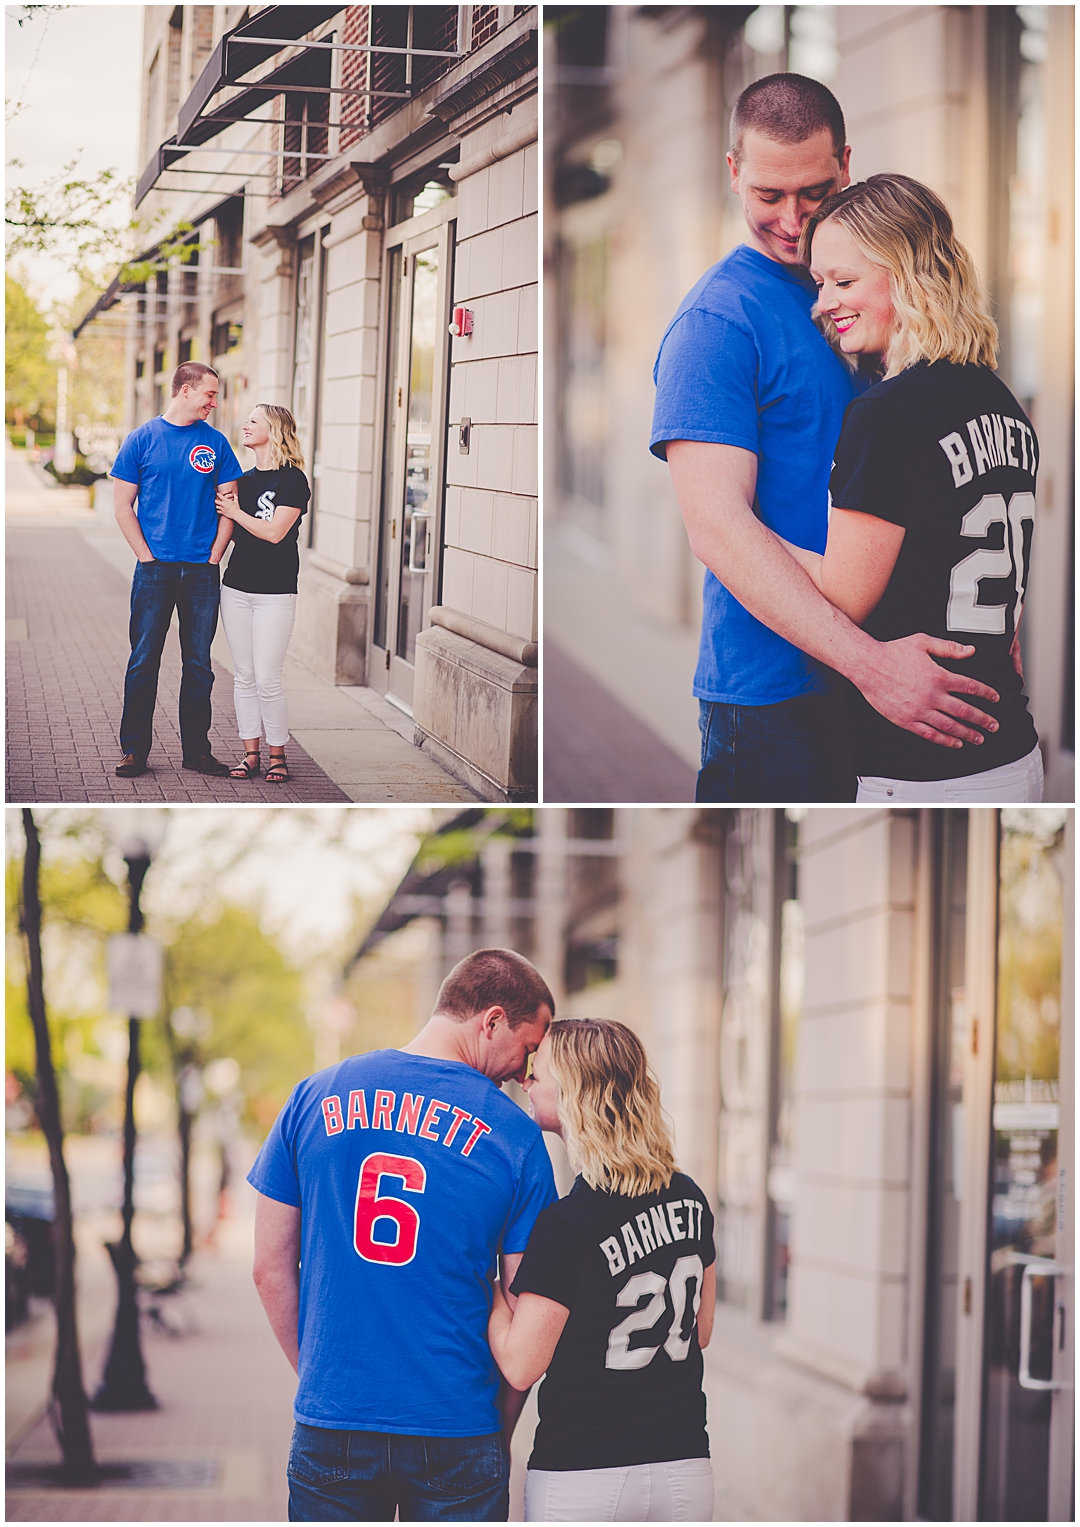 Urban Engagement Session in Downtown Arlington Heights, Illinois with Chicagoland wedding photographer Kara Evans Photographer.